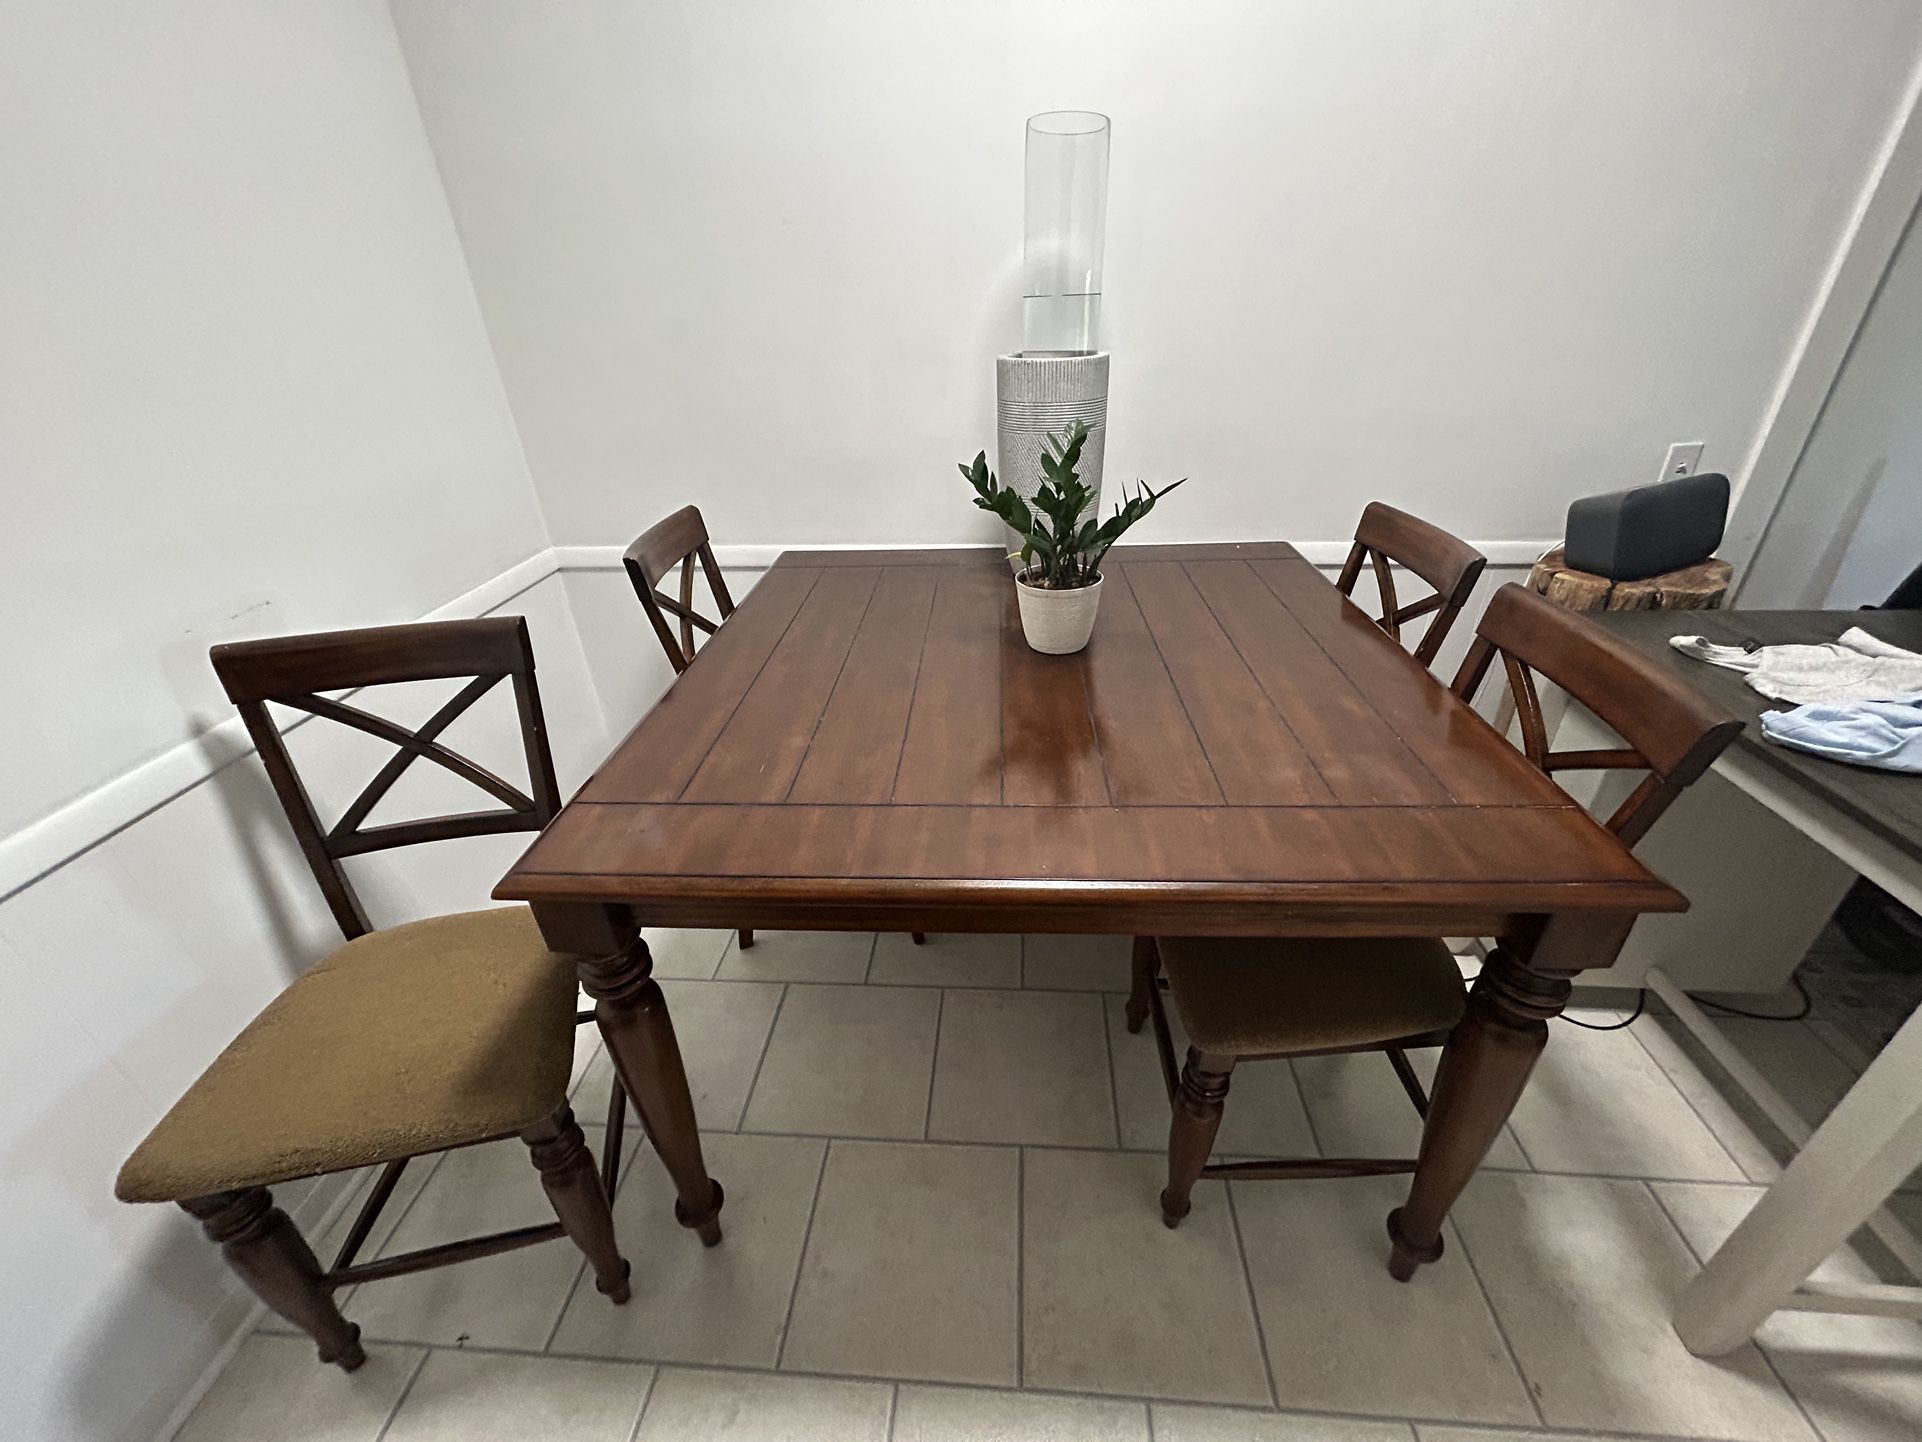 Tall Wooden Table And Chairs